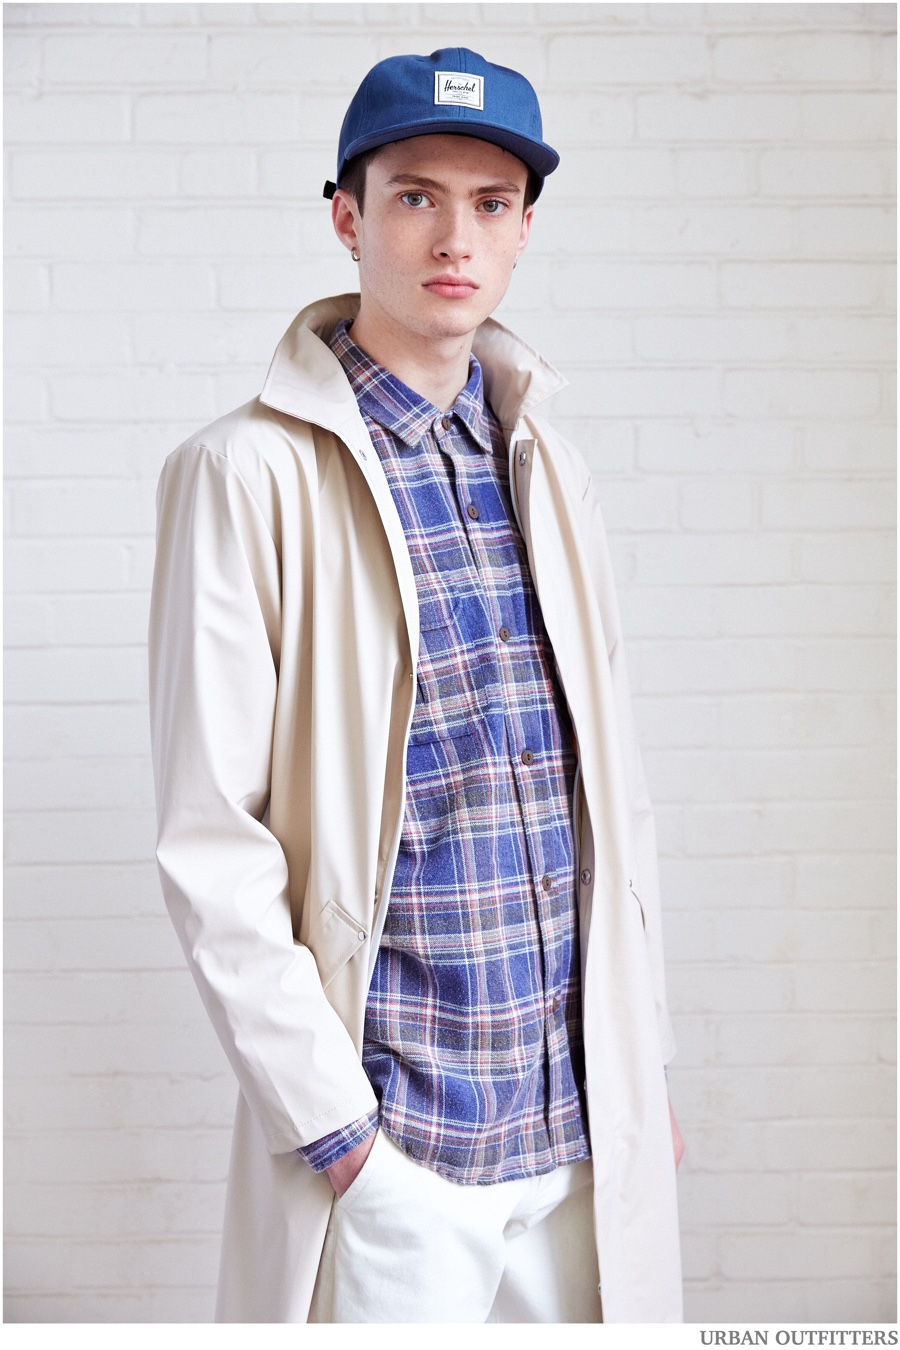 90s Men’s Styles Channeled for Urban Outfitters Spring Preview | Page 2 ...